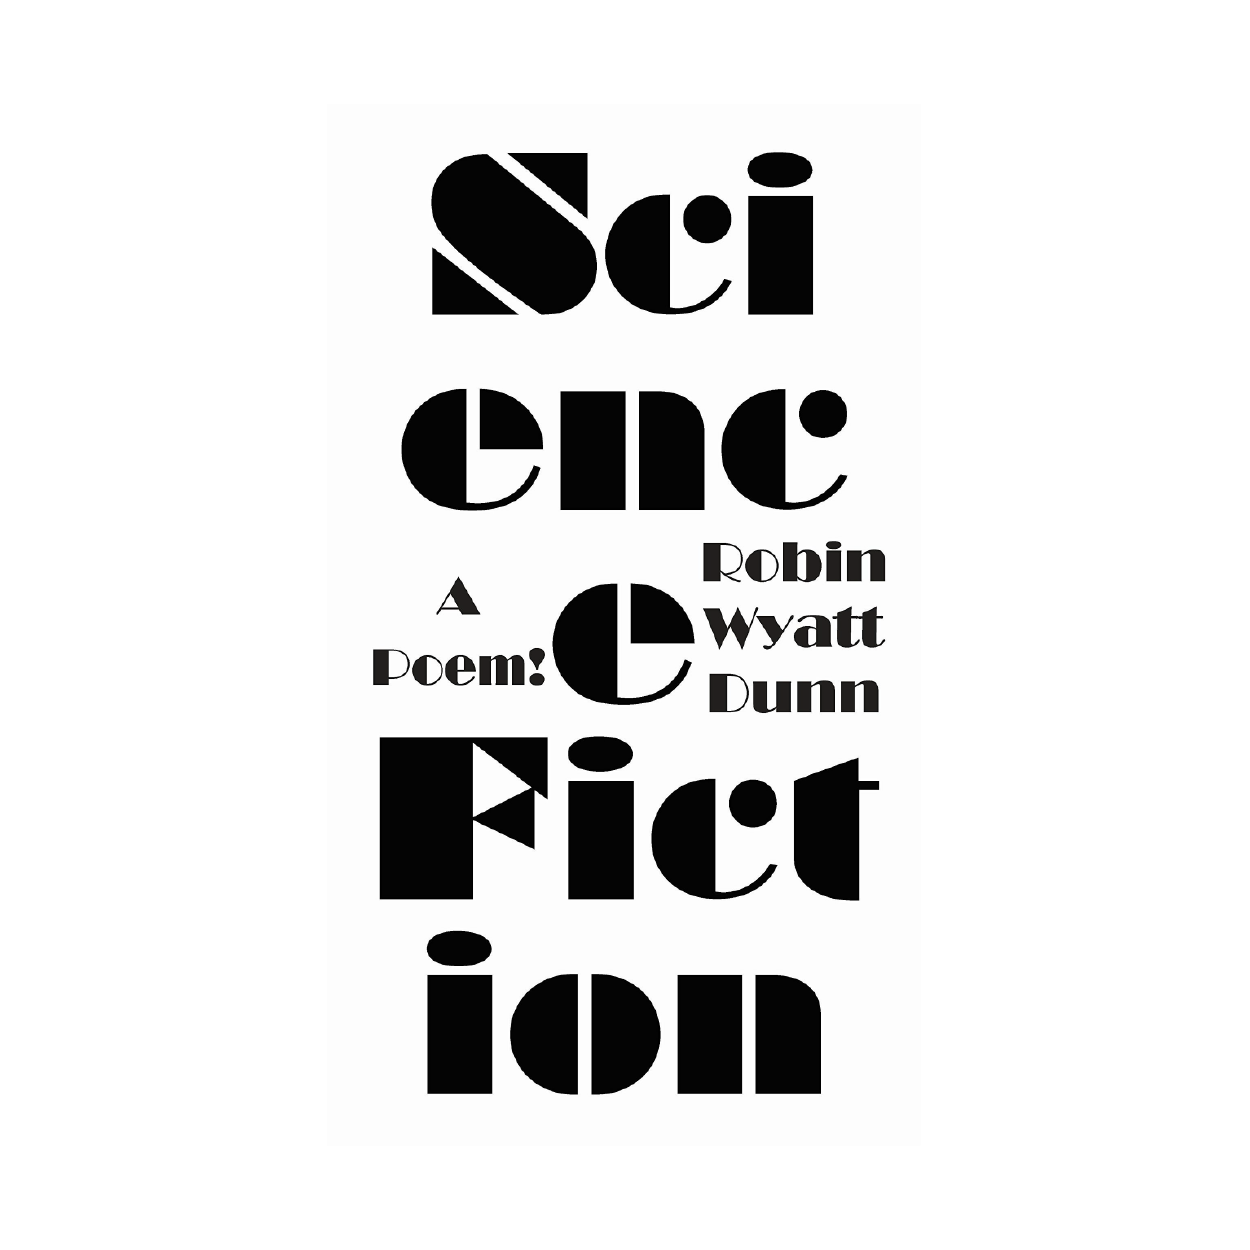 Science Fiction: A Poem! (Art and Literary) by Robin Wyatt Dunn